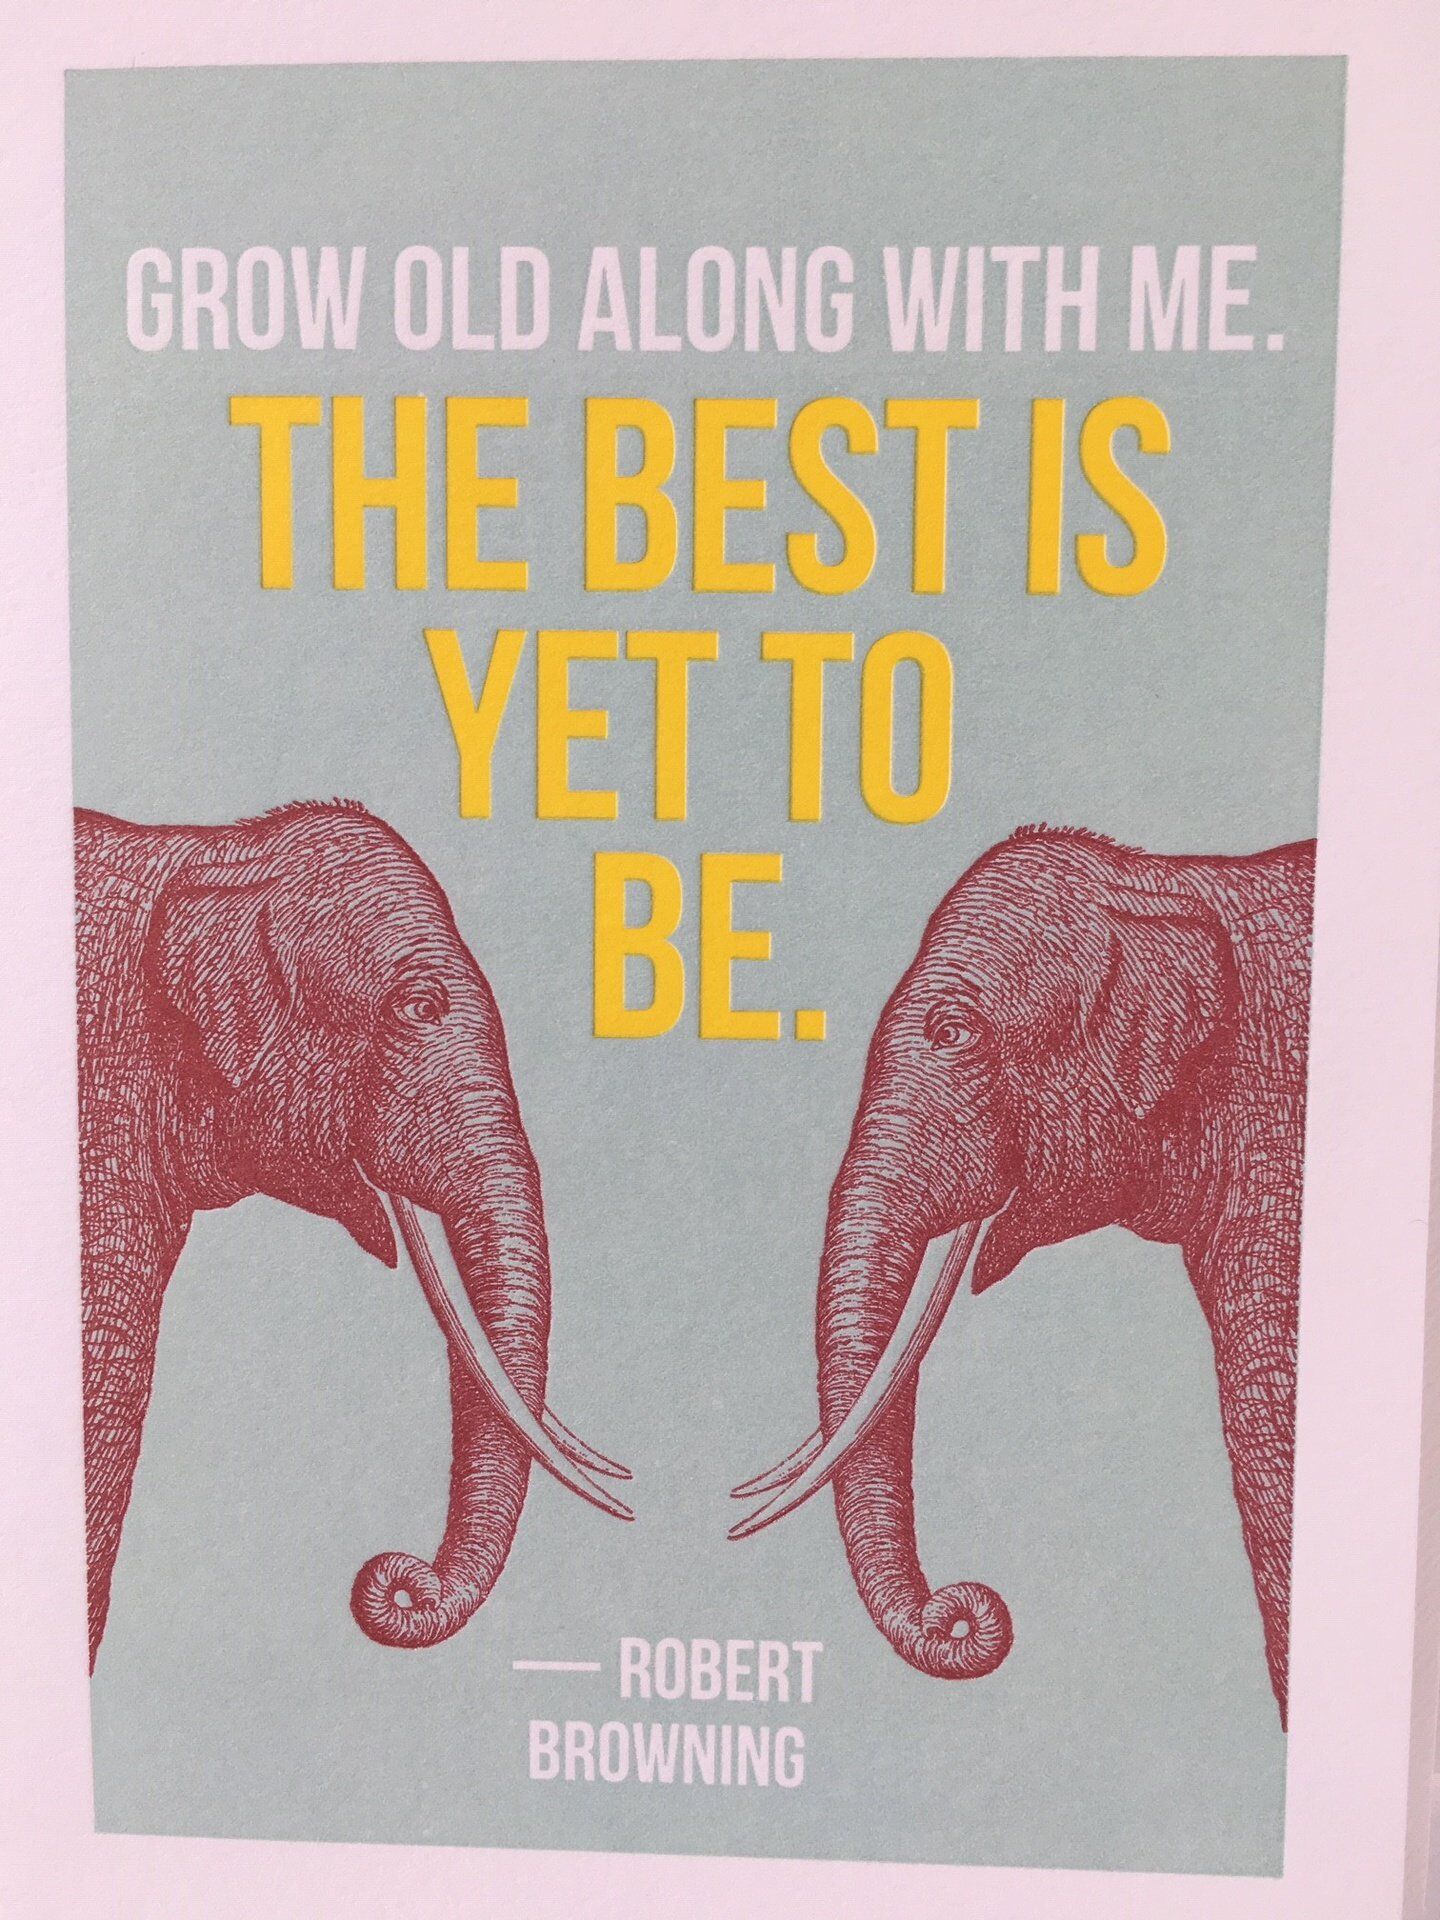 Card (Archivist Gallery): Grow Old Along With Me